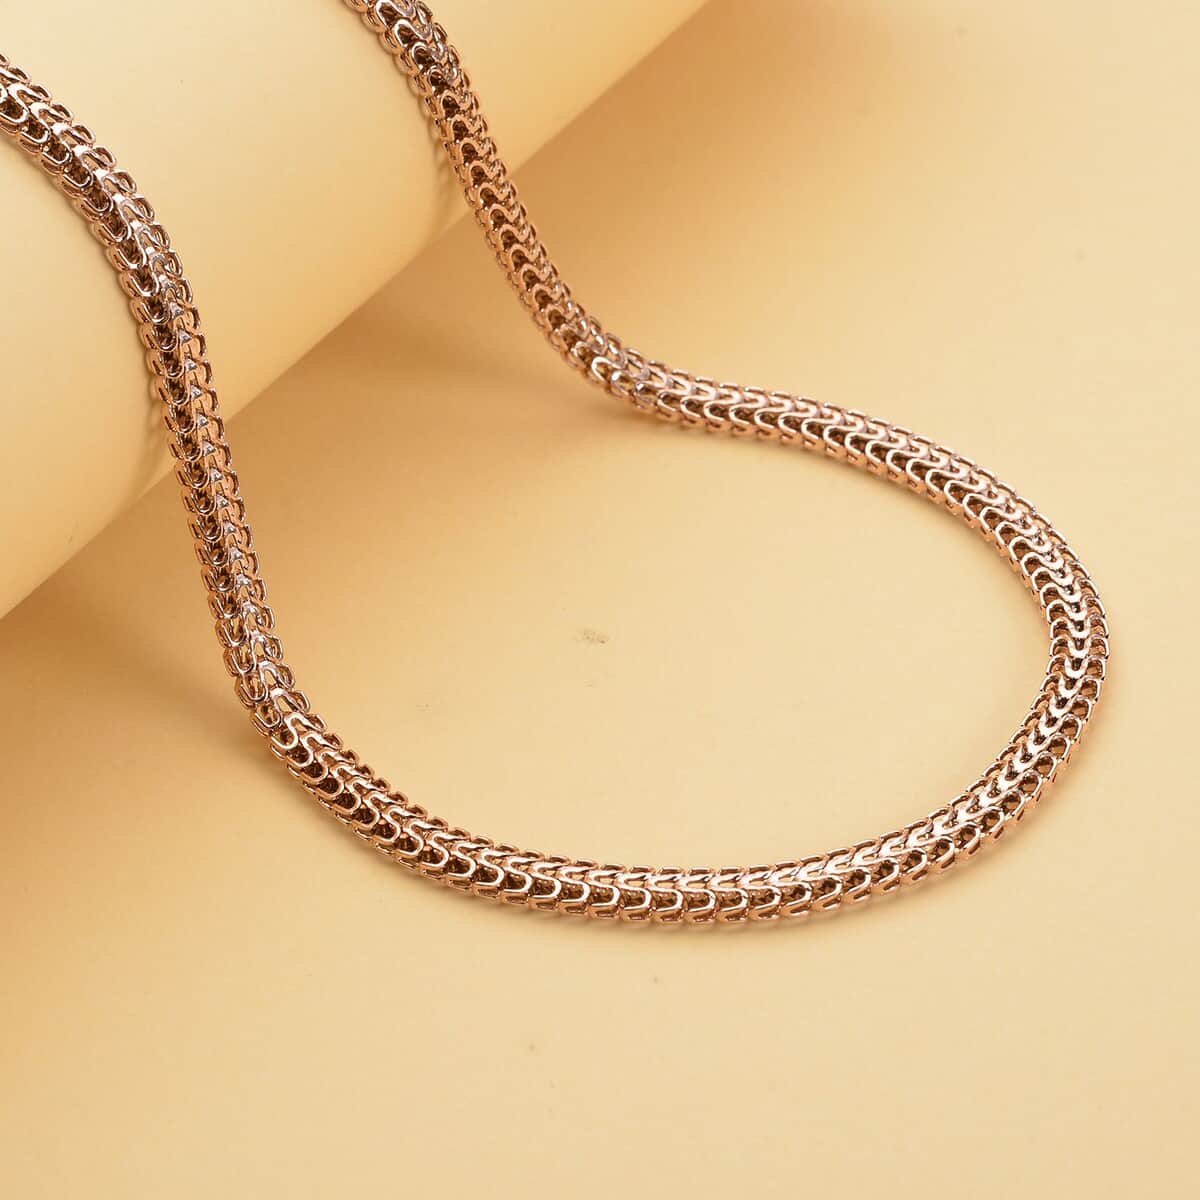 Fancy Mesh Chain Necklace with Adjustable Ball 18-29 Inches in ION Plated RG Stainless Steel image number 1